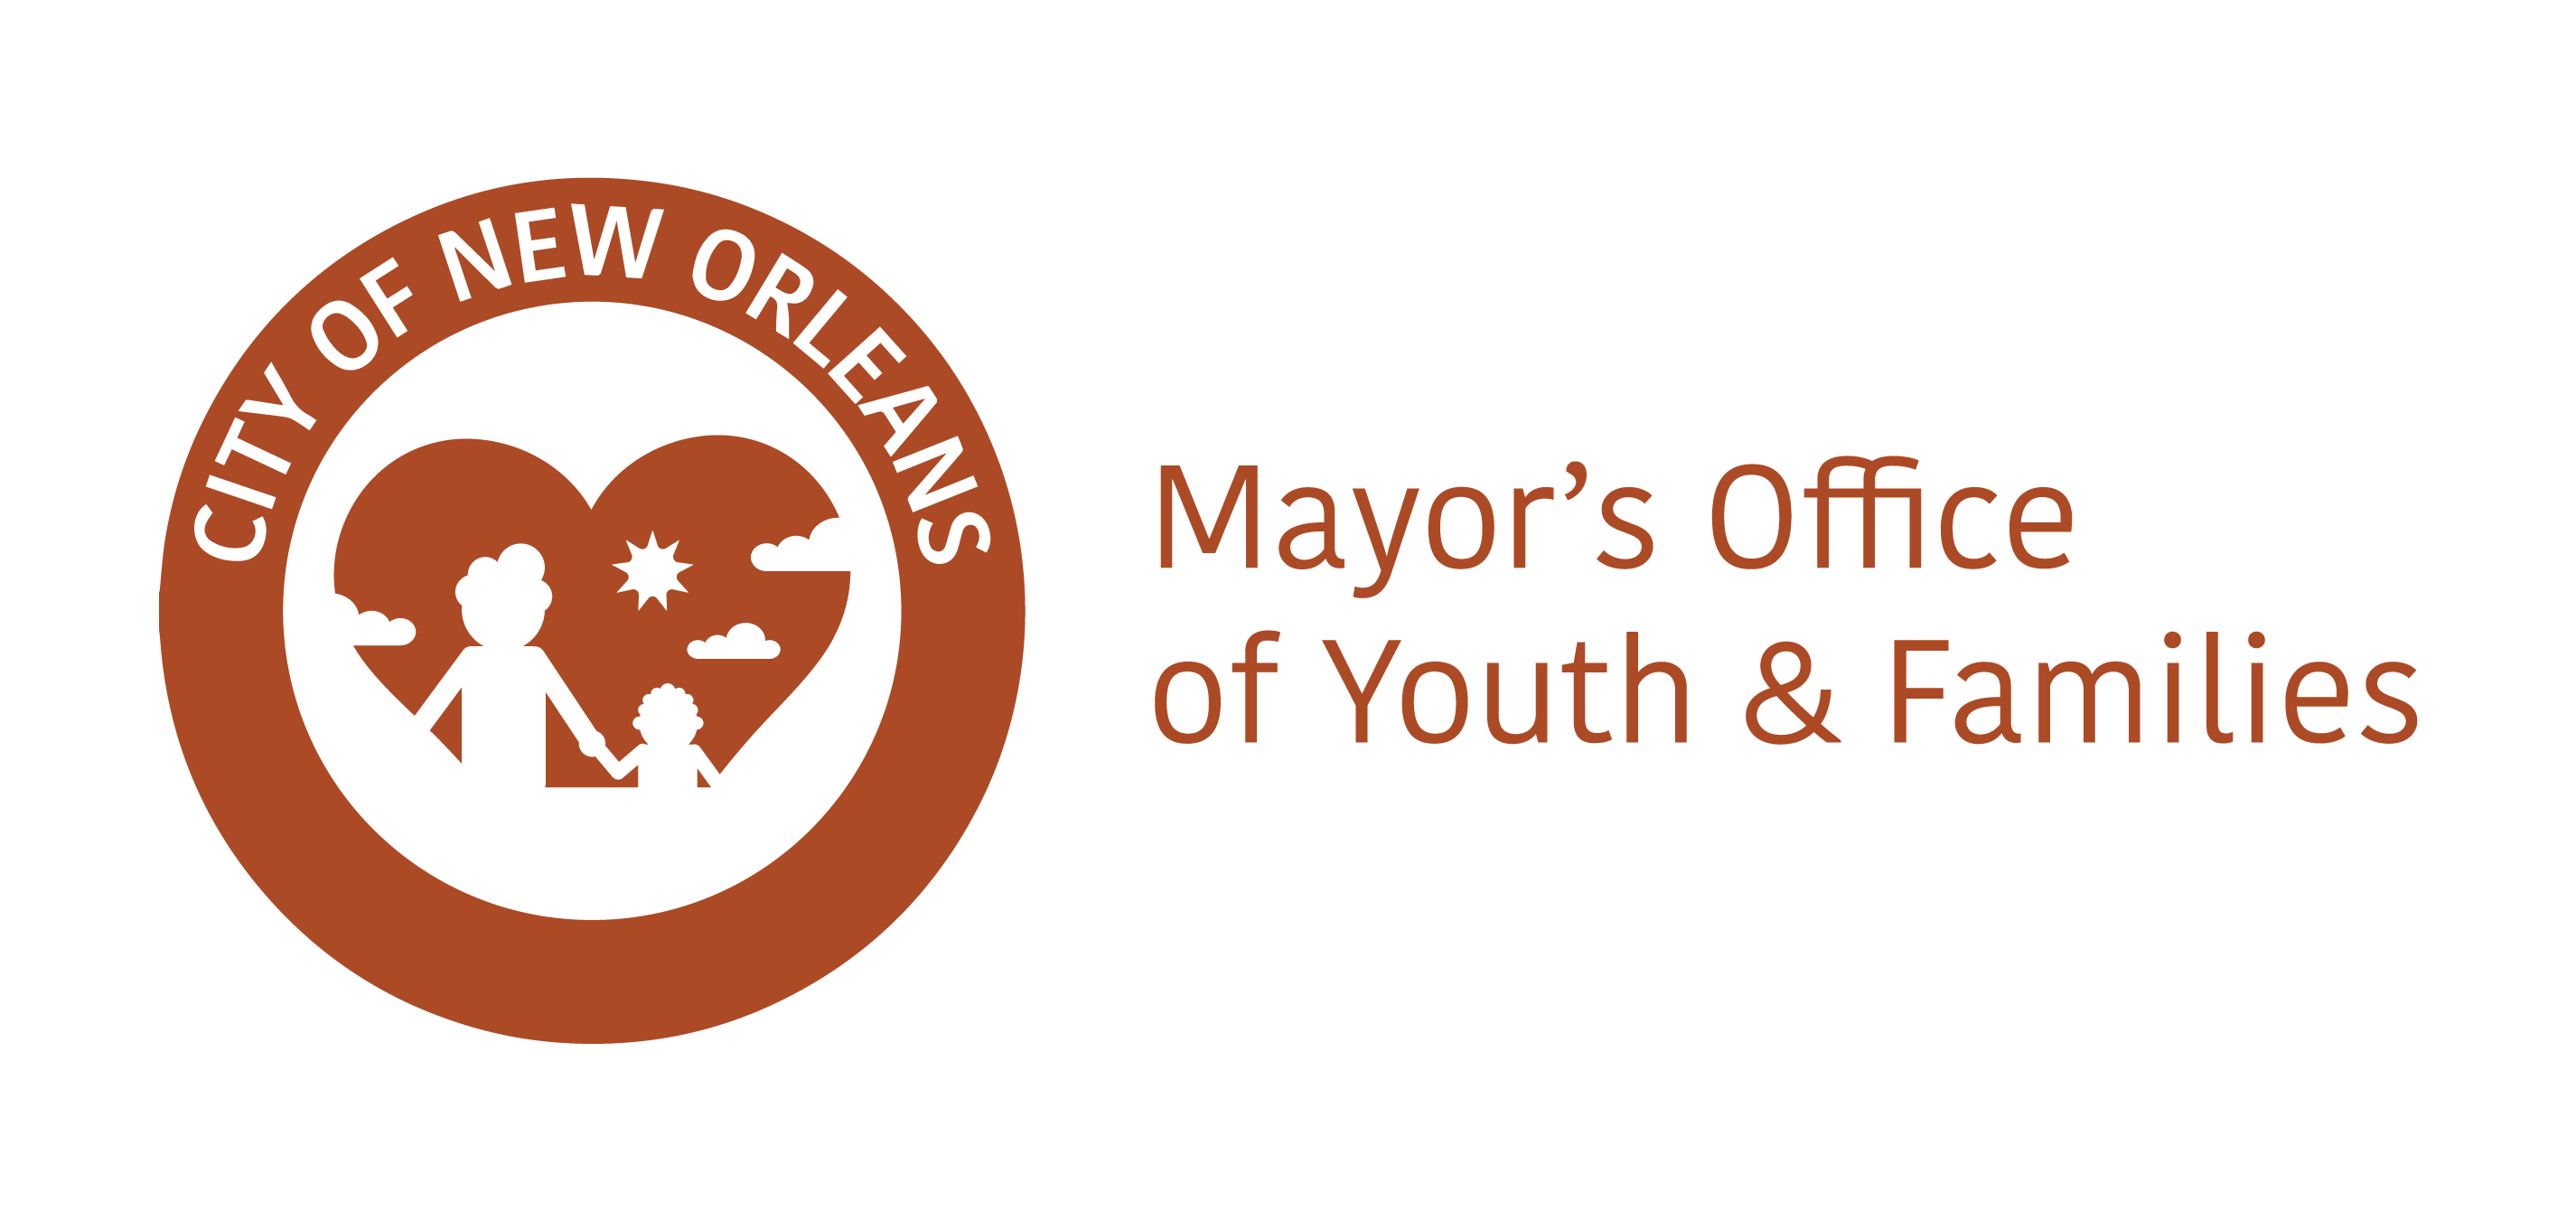 Mayor's Office of Youth & Families logo